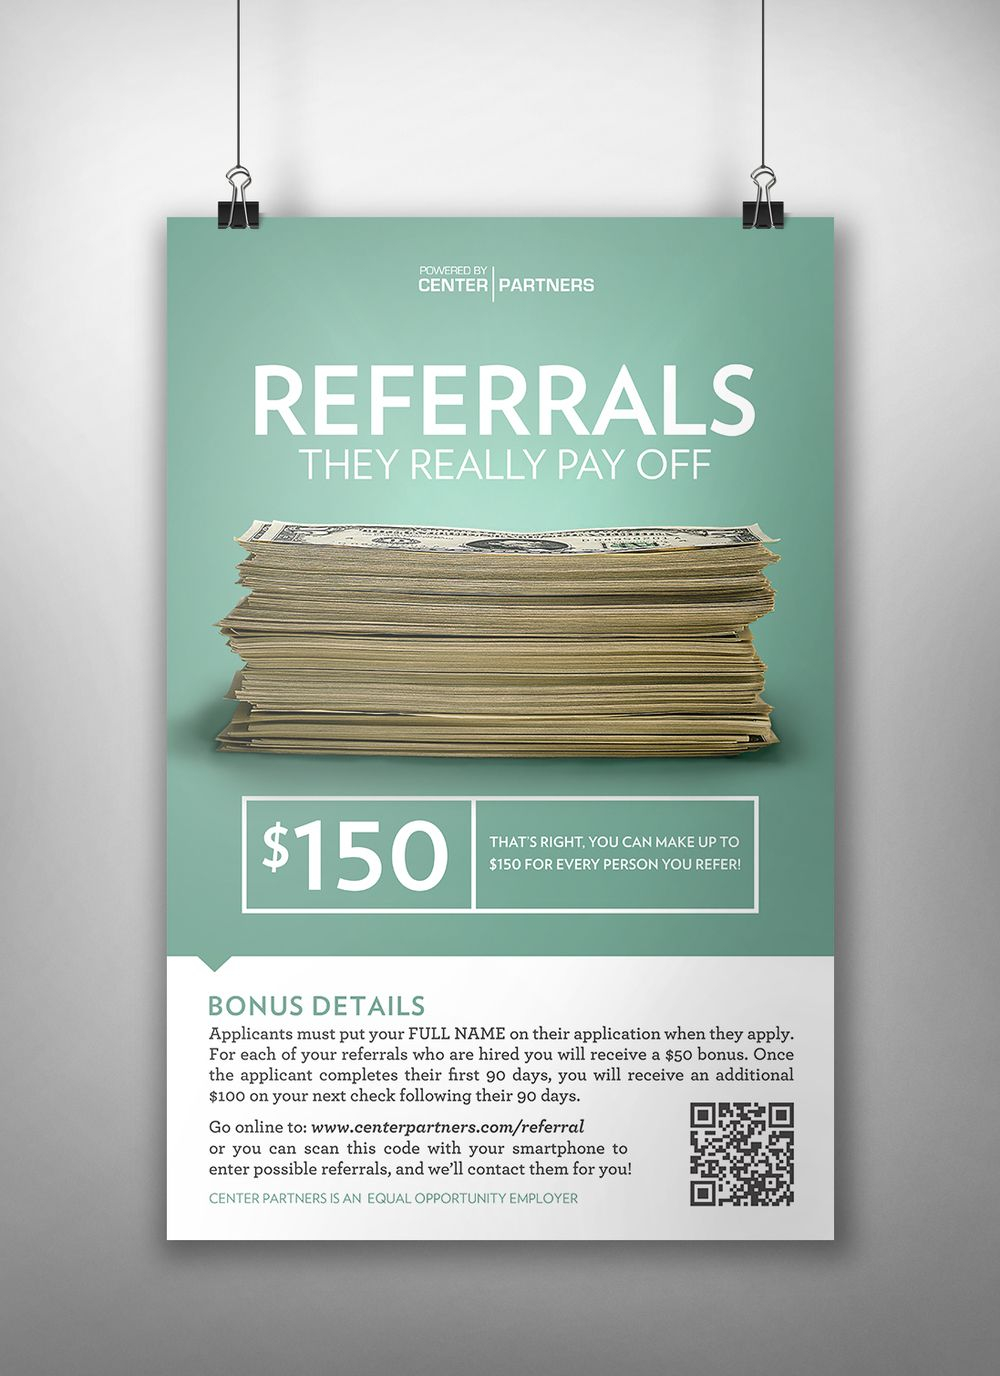 Sample Employee Referral Flyers - Vtwctr For Referral Program Flyer Template With Regard To Referral Program Flyer Template